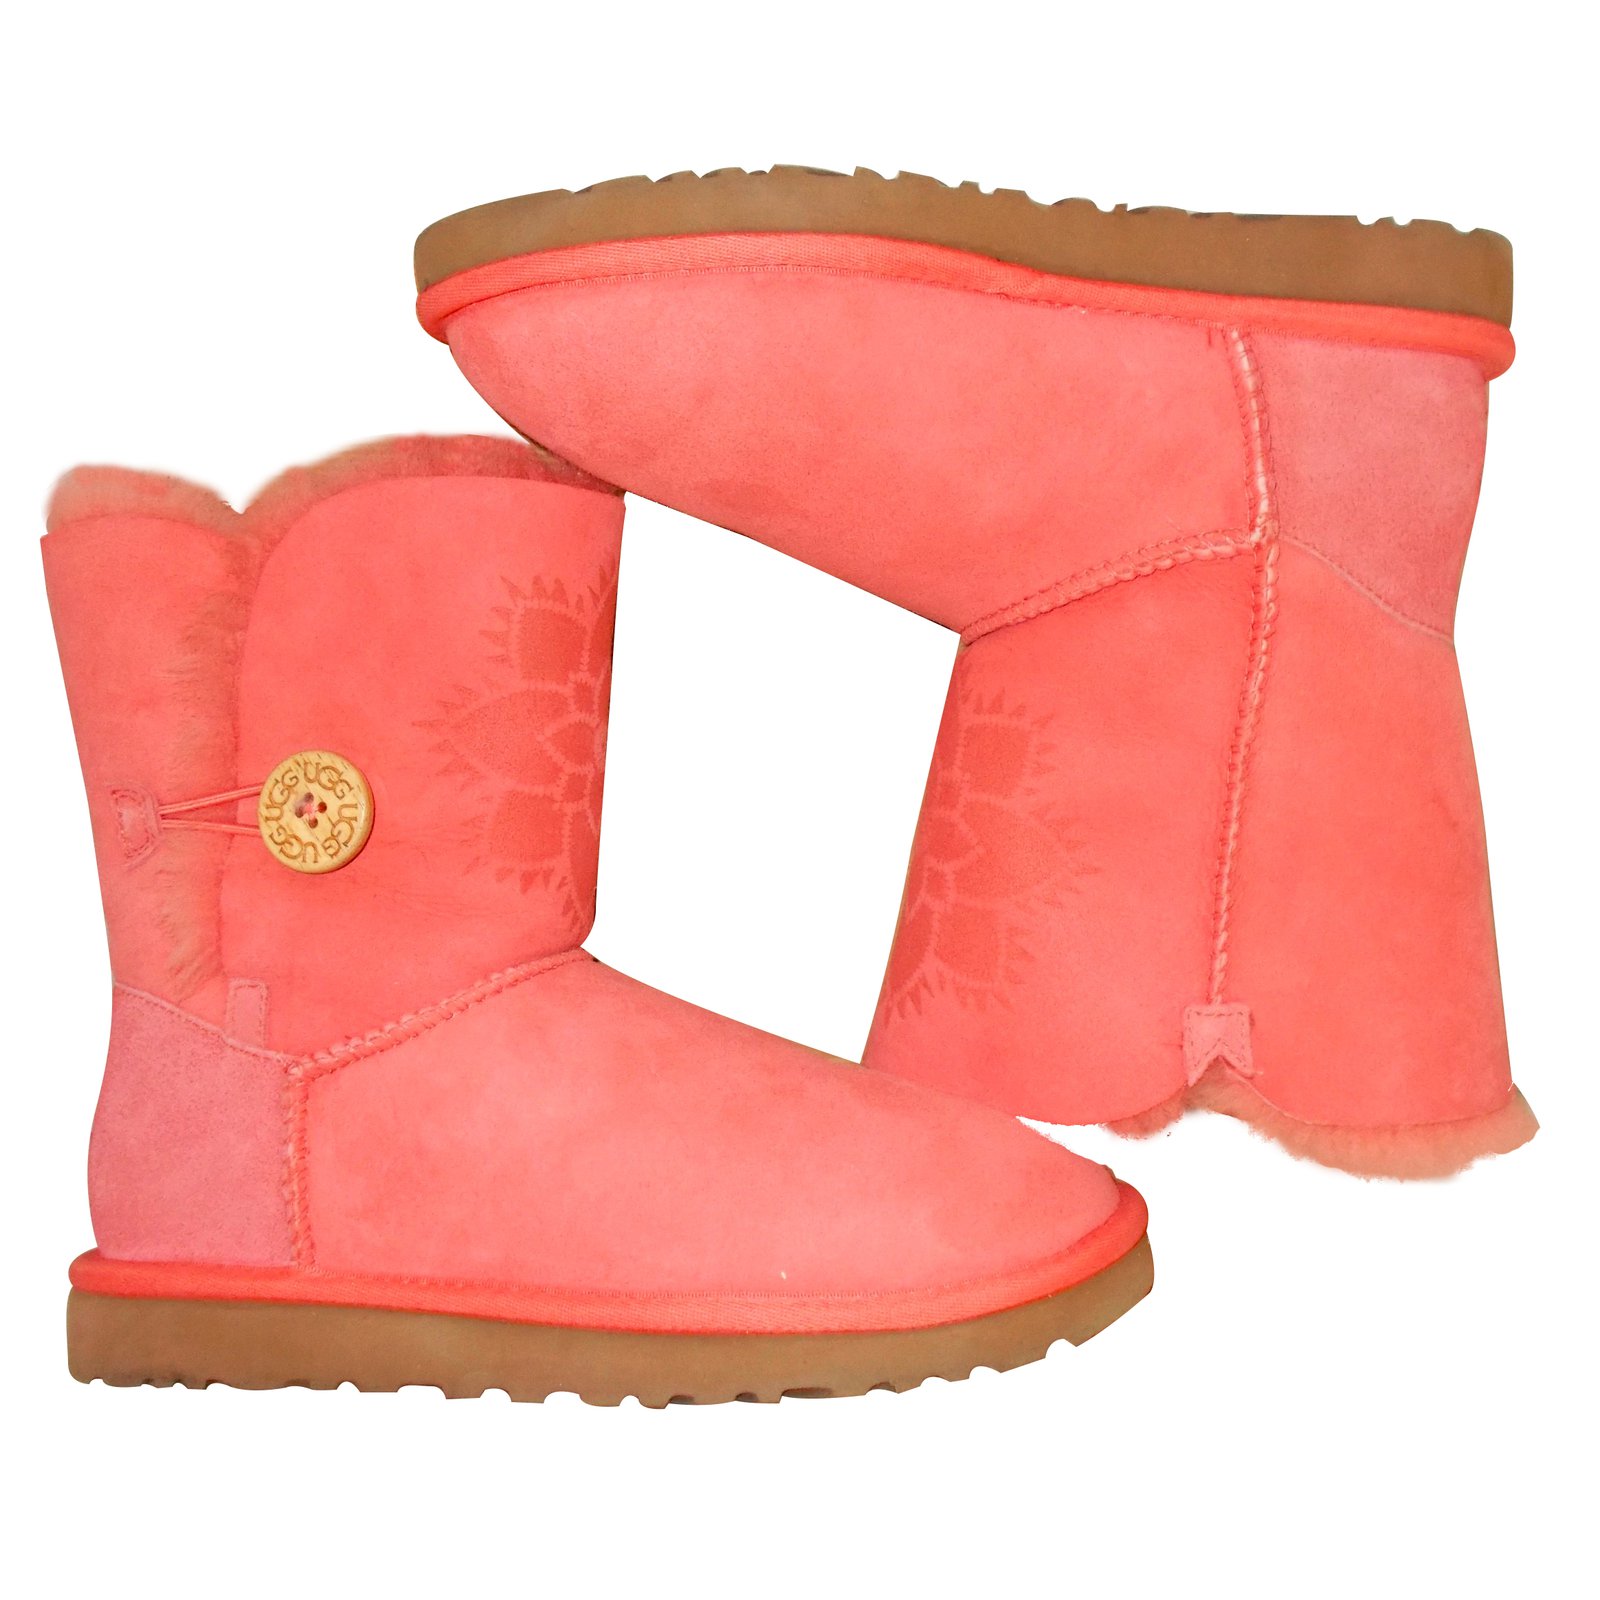 coral ugg boots